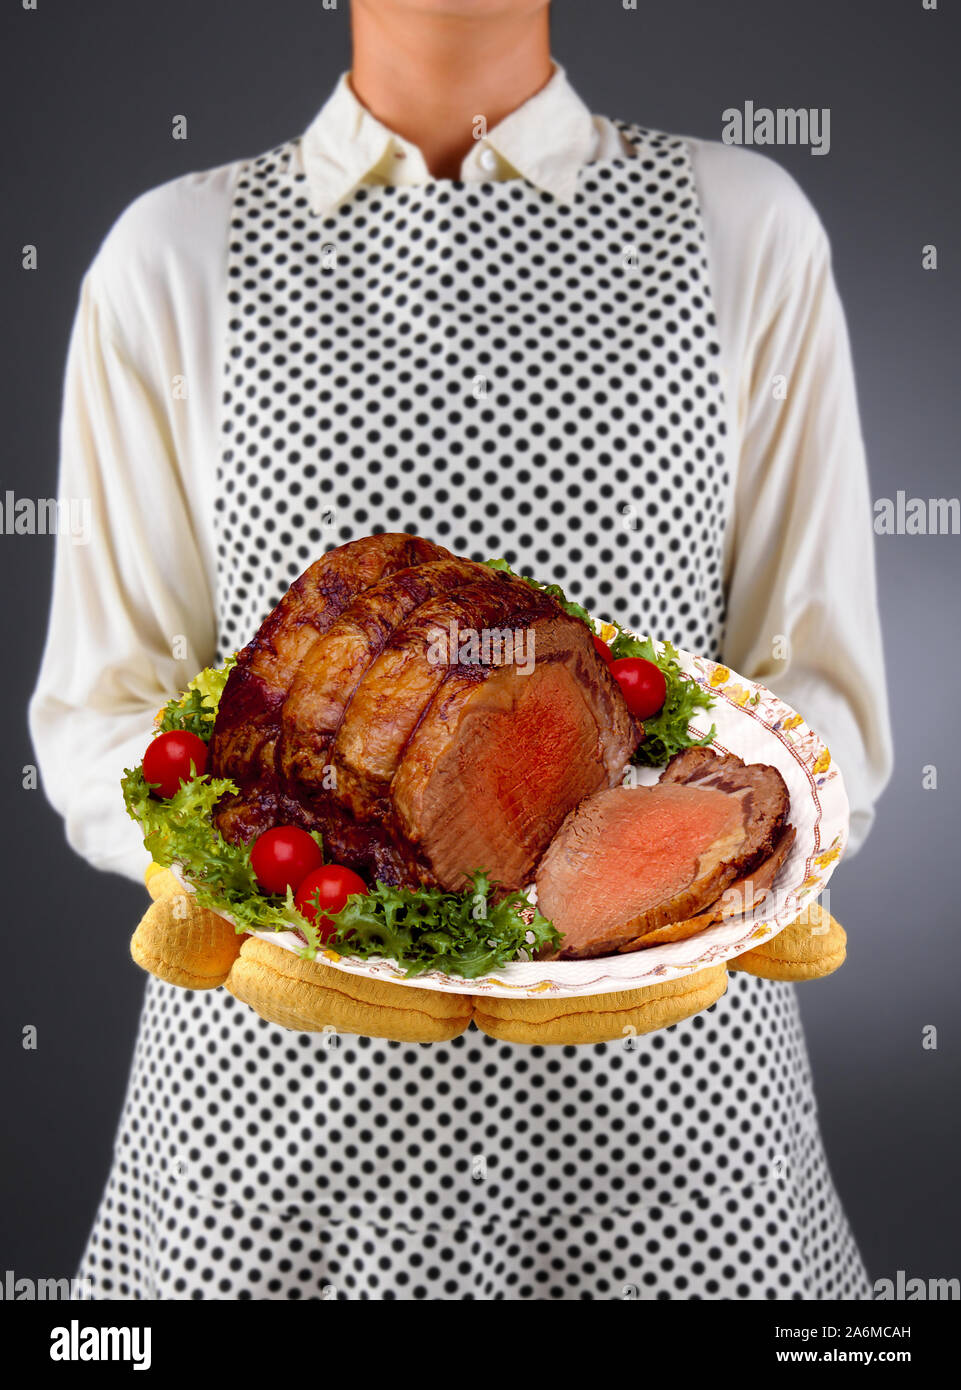 Closeup of a homemaker in an apron and oven mitts holding a Platter of Roast Beef, sliced with garnish. Stock Photo